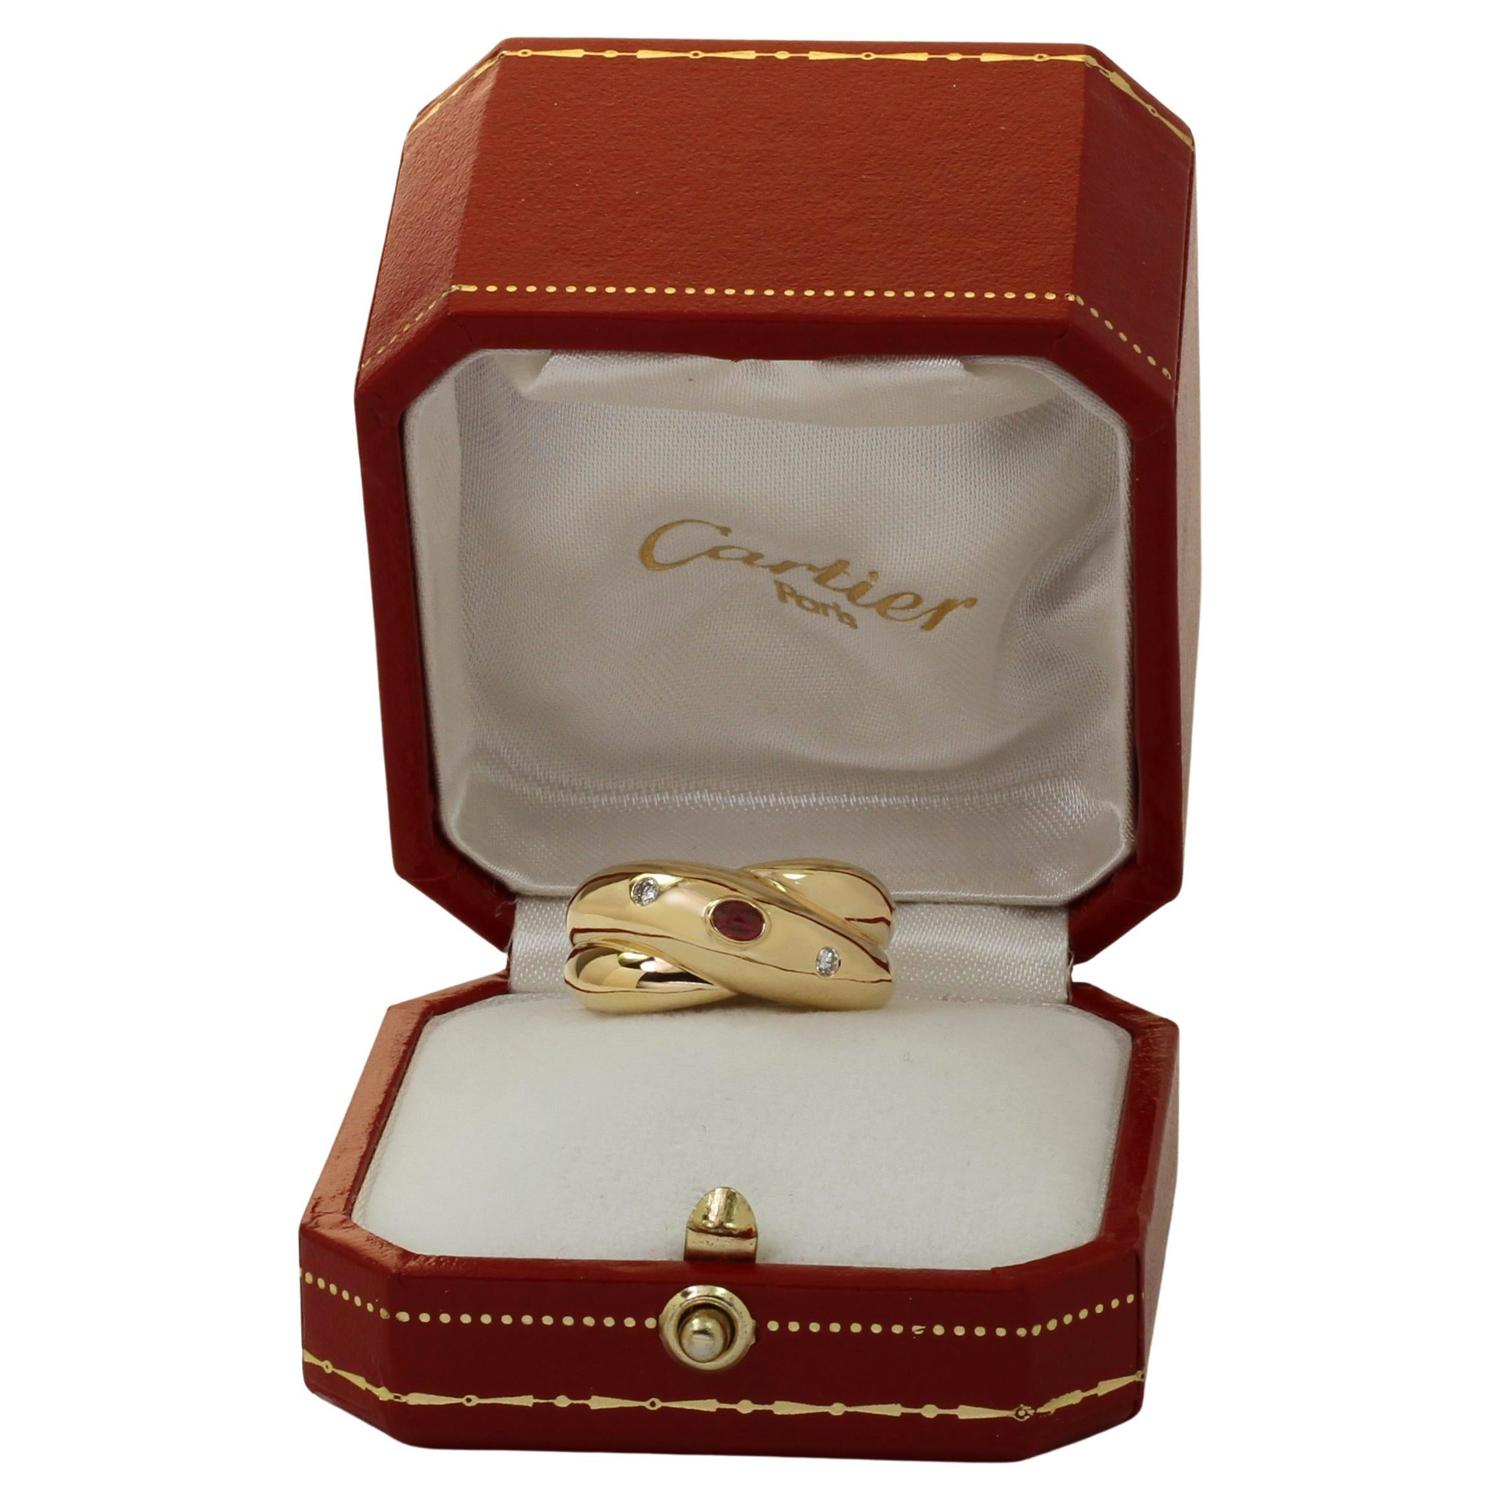 This gorgeous authentic Cartier ring from the elegant Colisee collection features the intertwiend X band motif crafted in 18k yellow gold and bezel-set with a cabochon oval ruby center stone and two round brilliant D-E-F VVS1-VVS2 diamonds. Made in